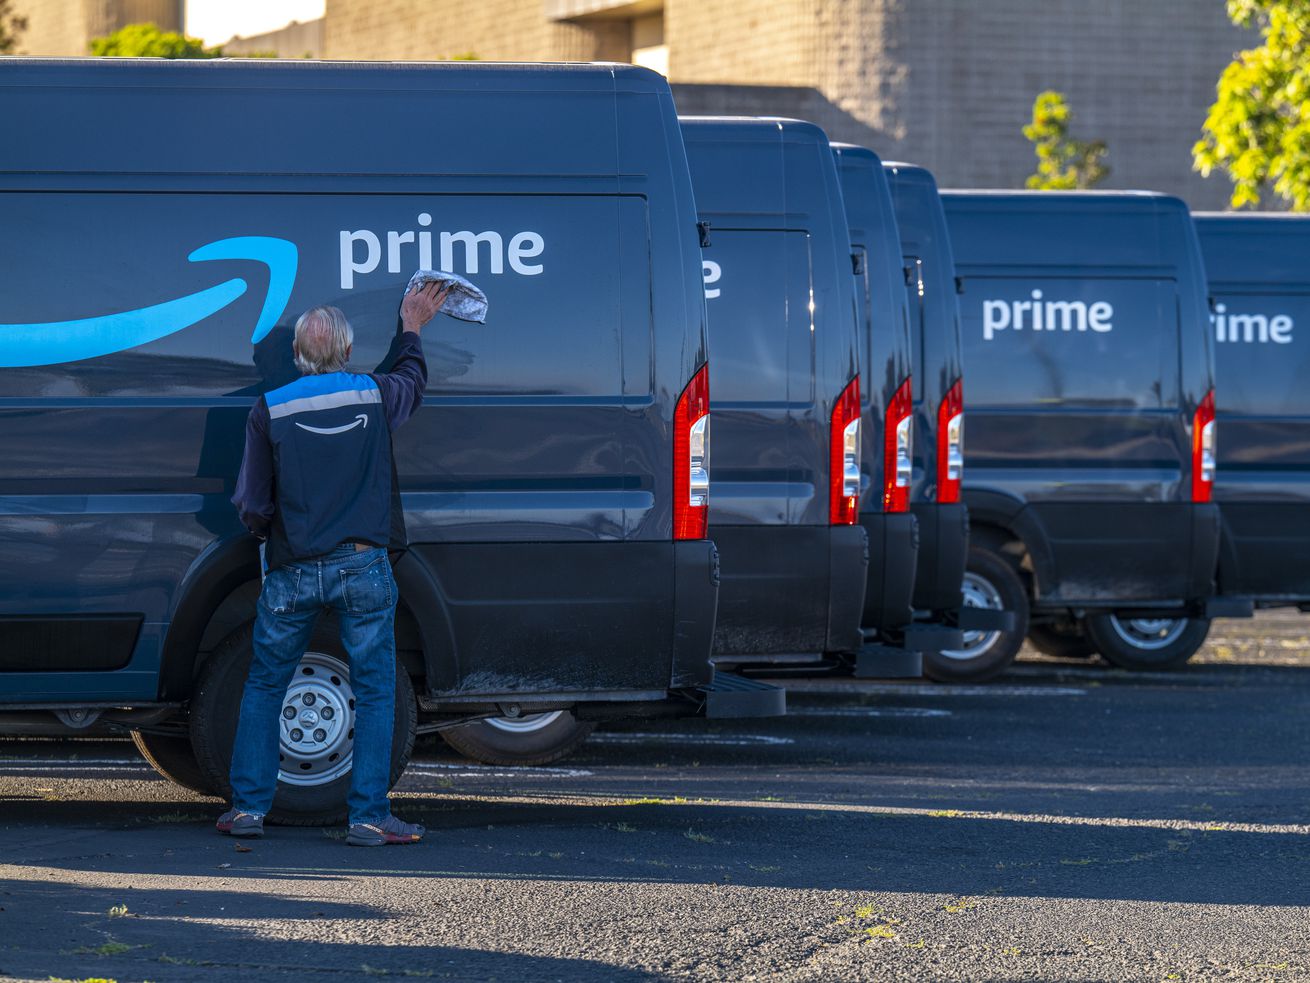 A contractor cleans the word “prime” on an Amazon delivery truck in California. The truck is one of several parked in a row.